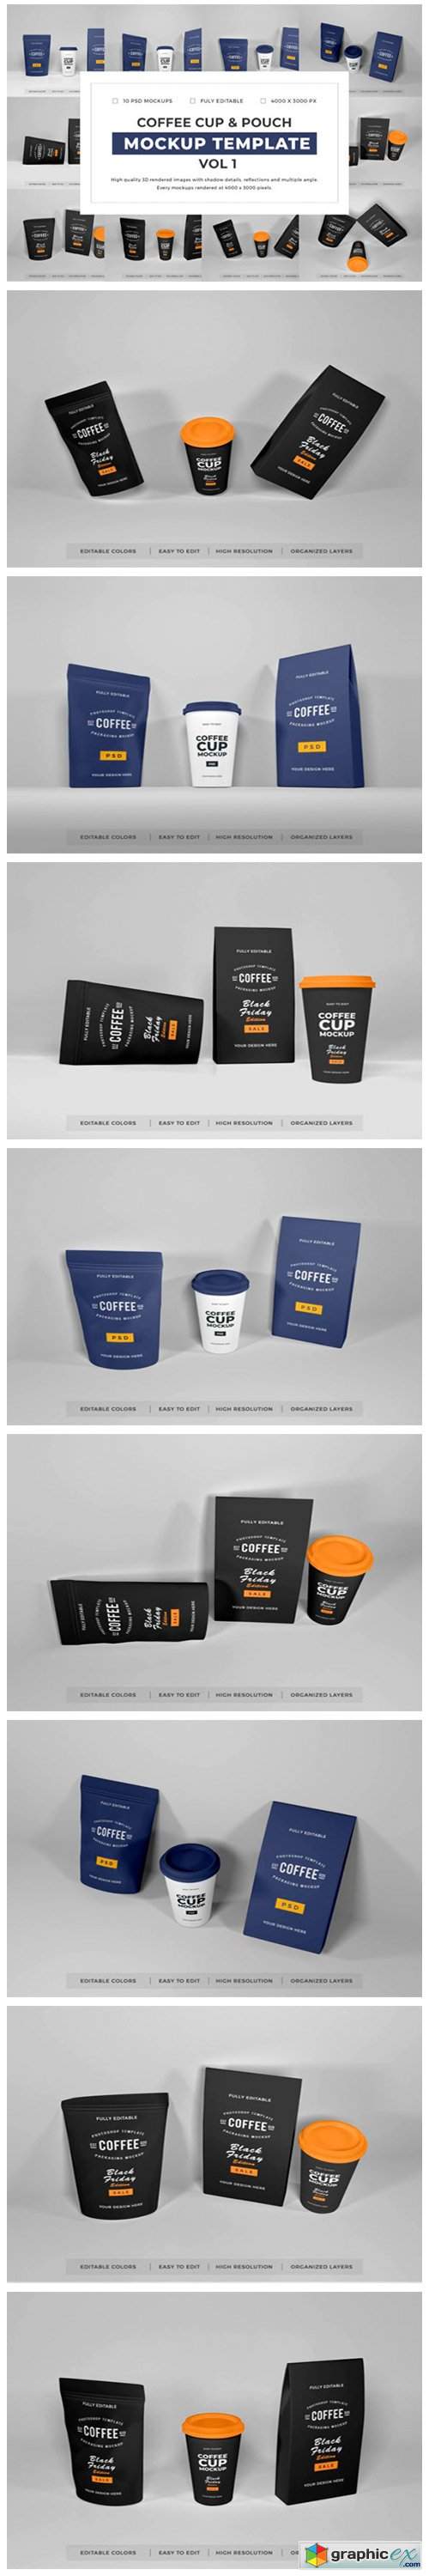  Coffee Cup and Pouch Mockup Bundle Vol 1 